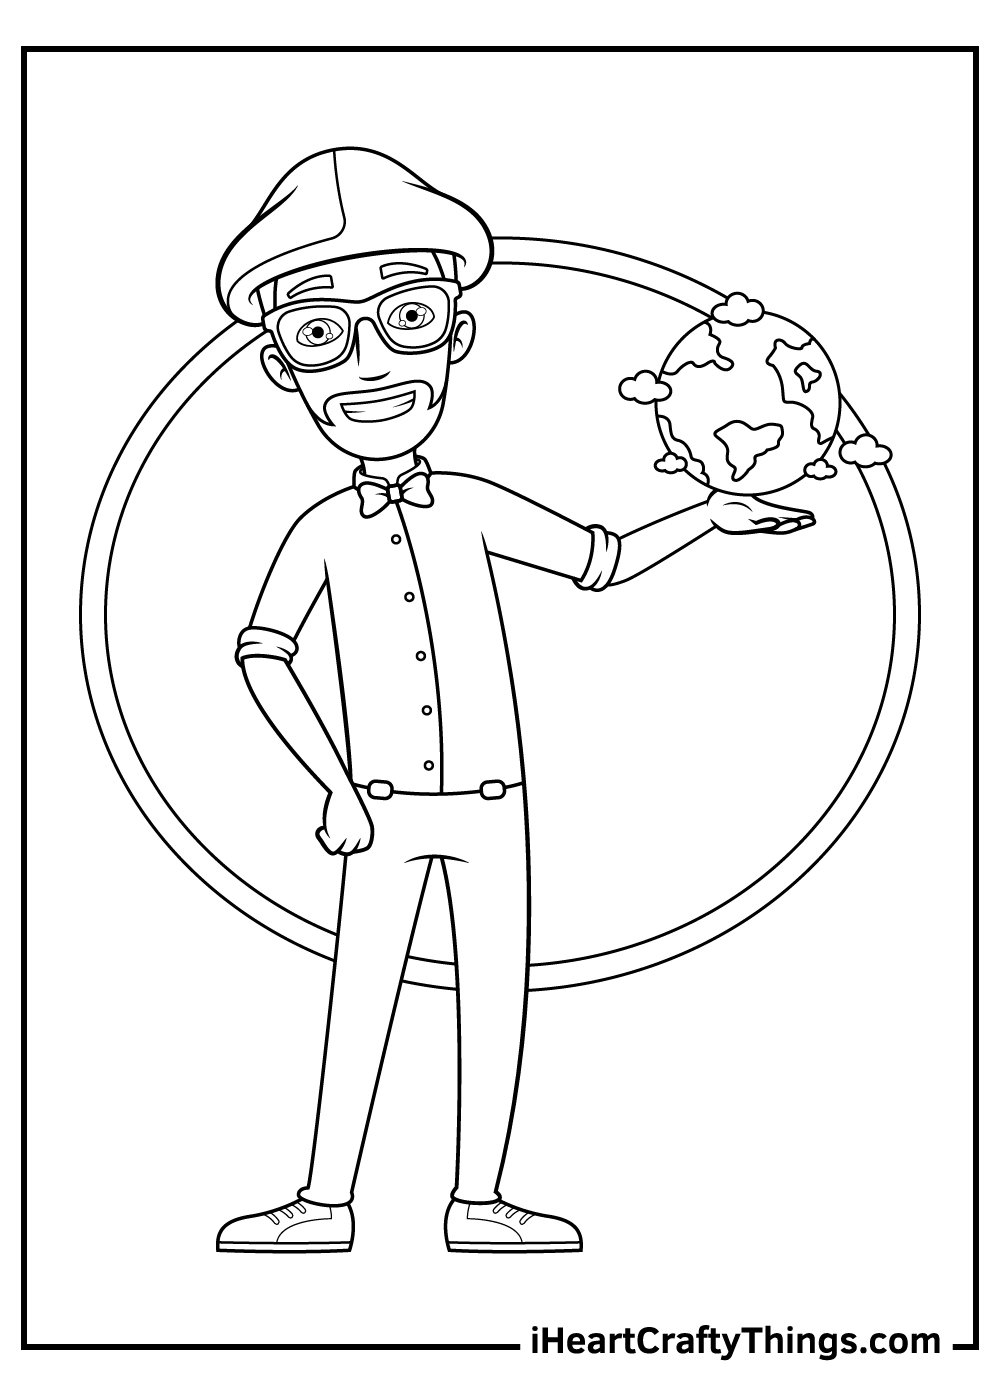 Blippi character coloring pages free printables